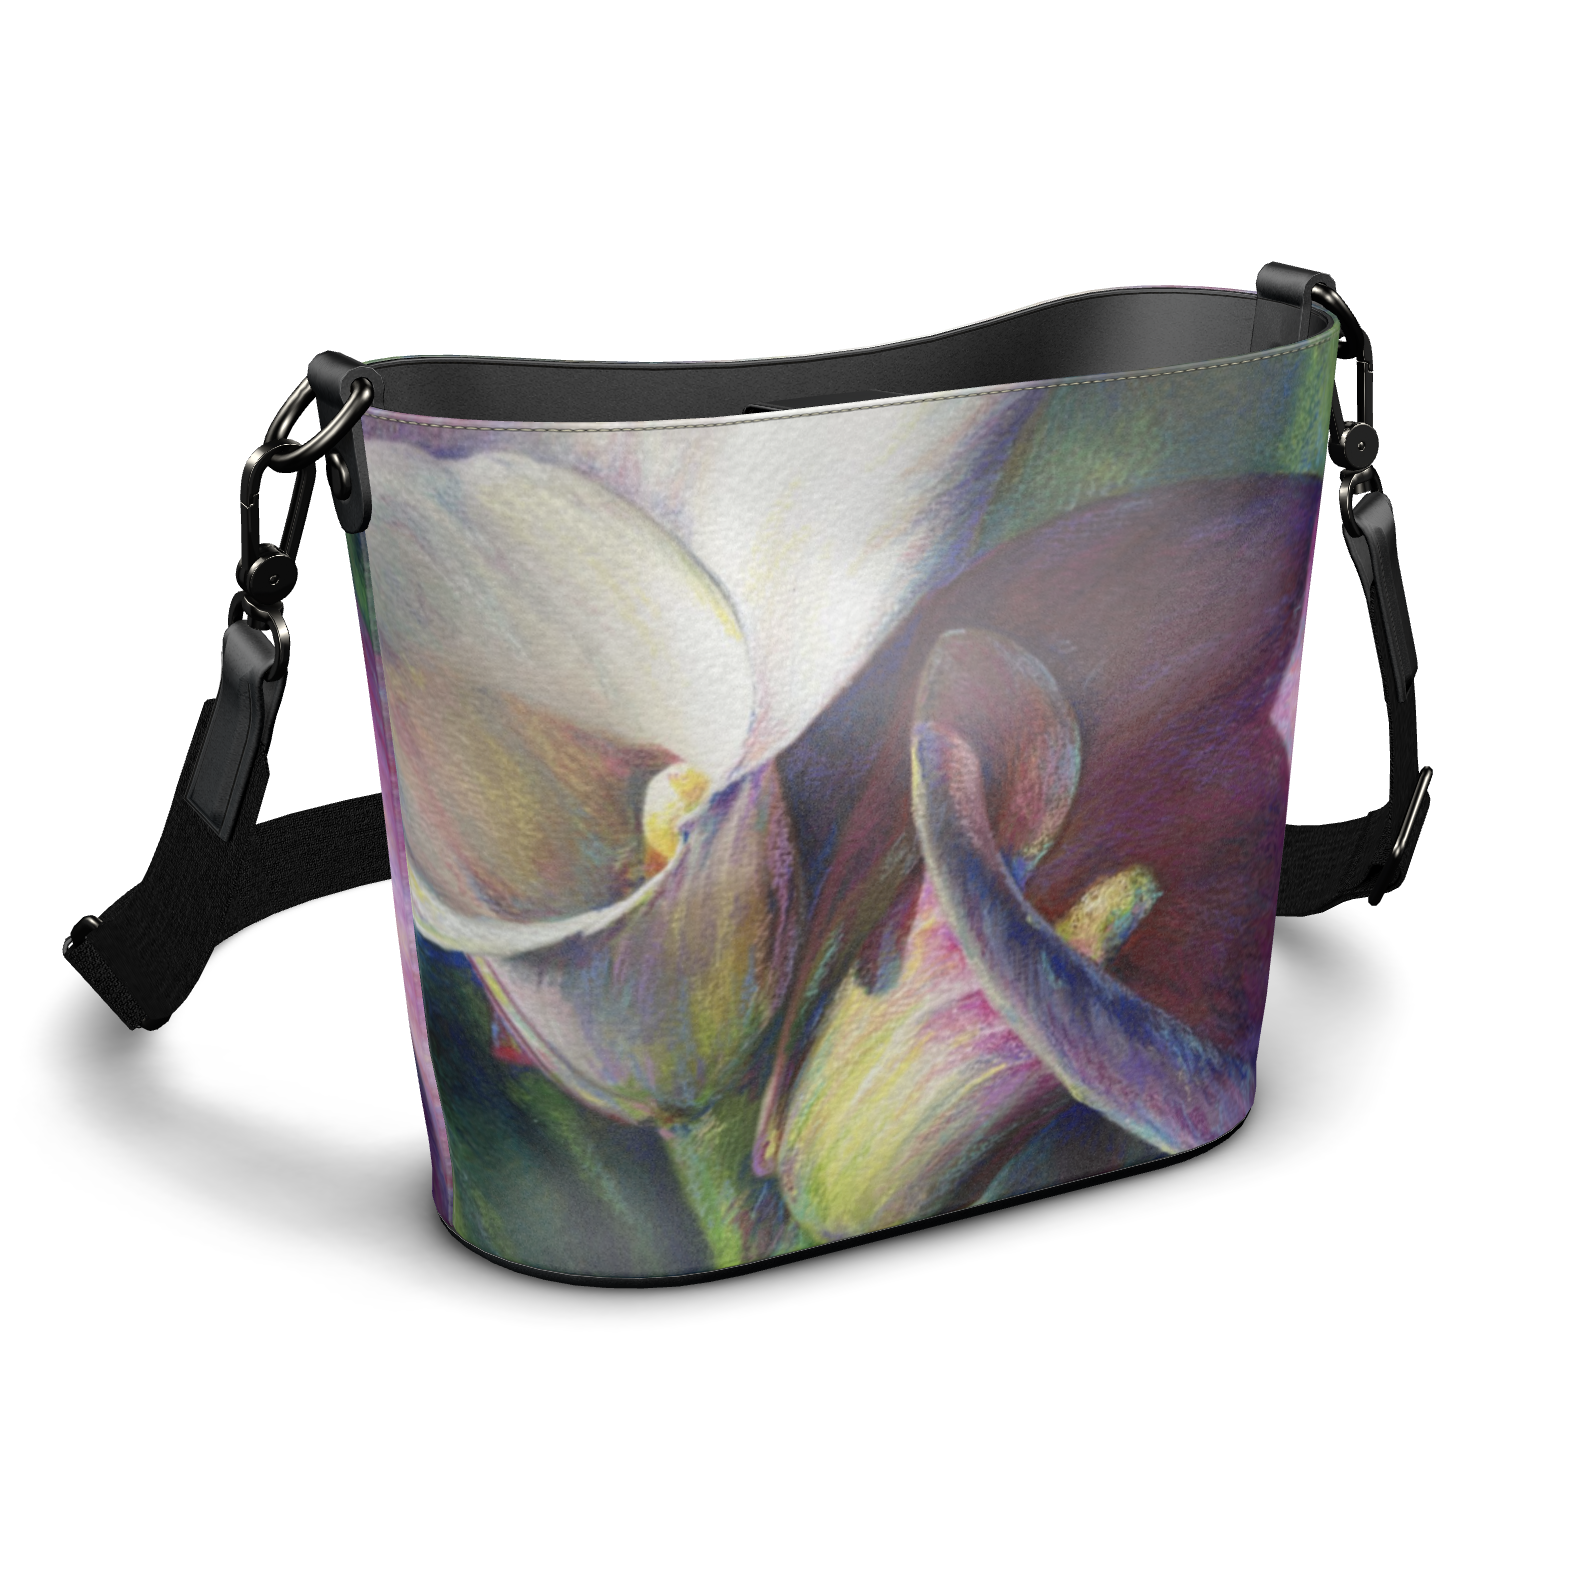 Pink Calla Lily leather handbag created by Eileen Baumeister McIntyre for Garden of Silver. www.gardenofsilver.com